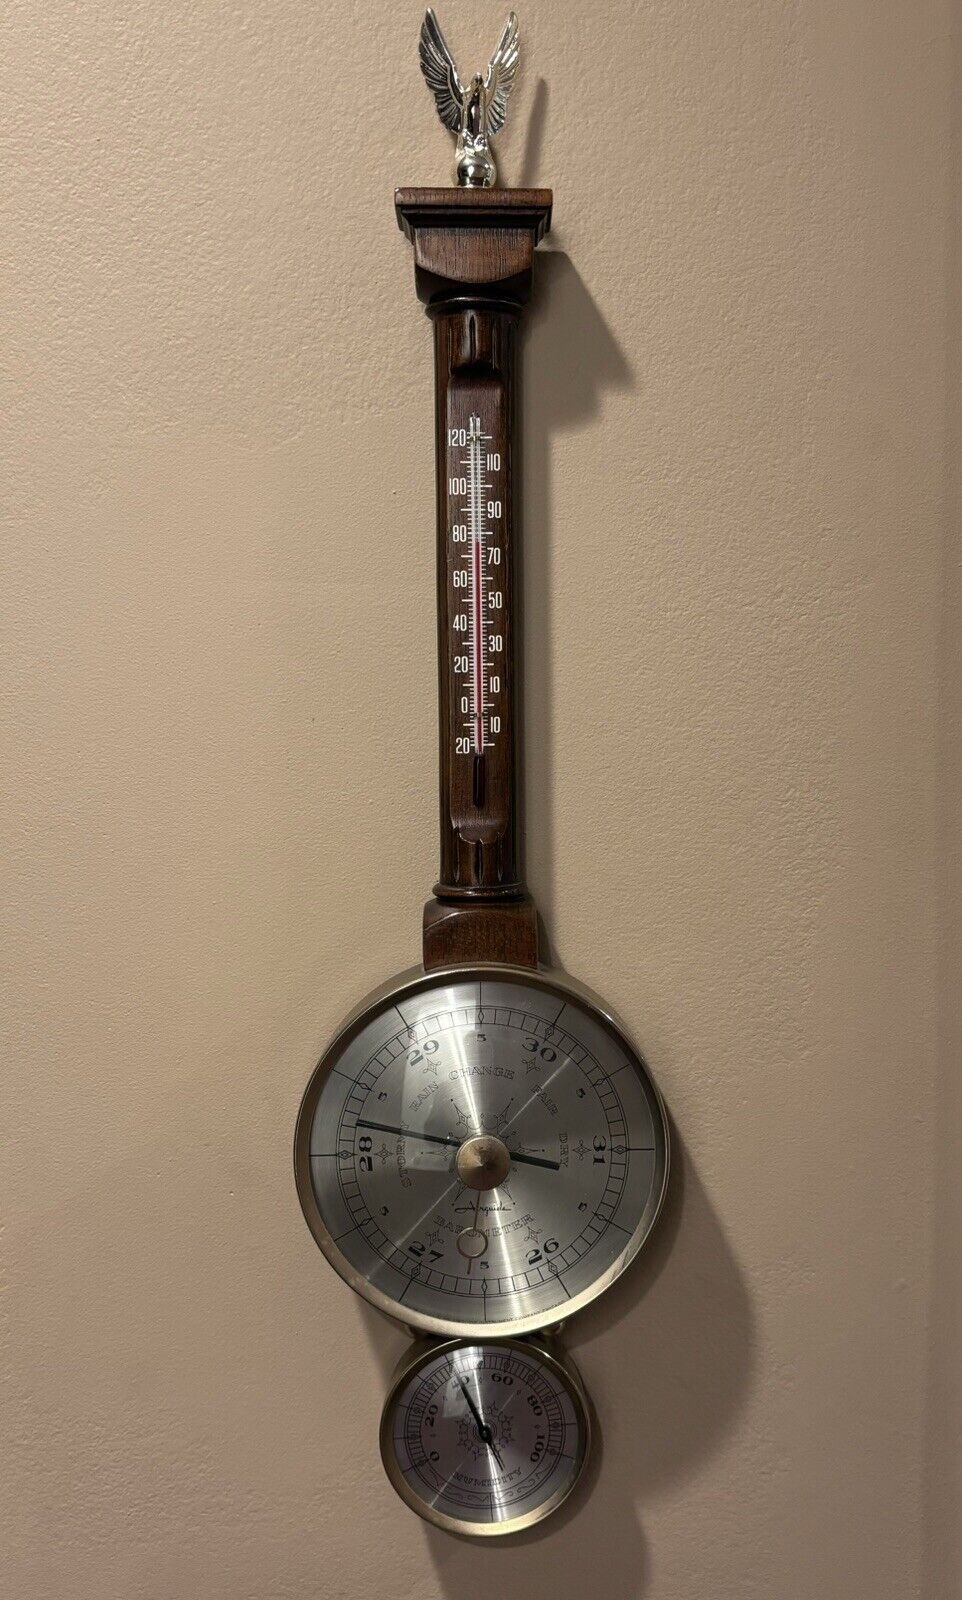 Vintage Airguide Barometer Banjo Style Weather Station Thermometer Brass